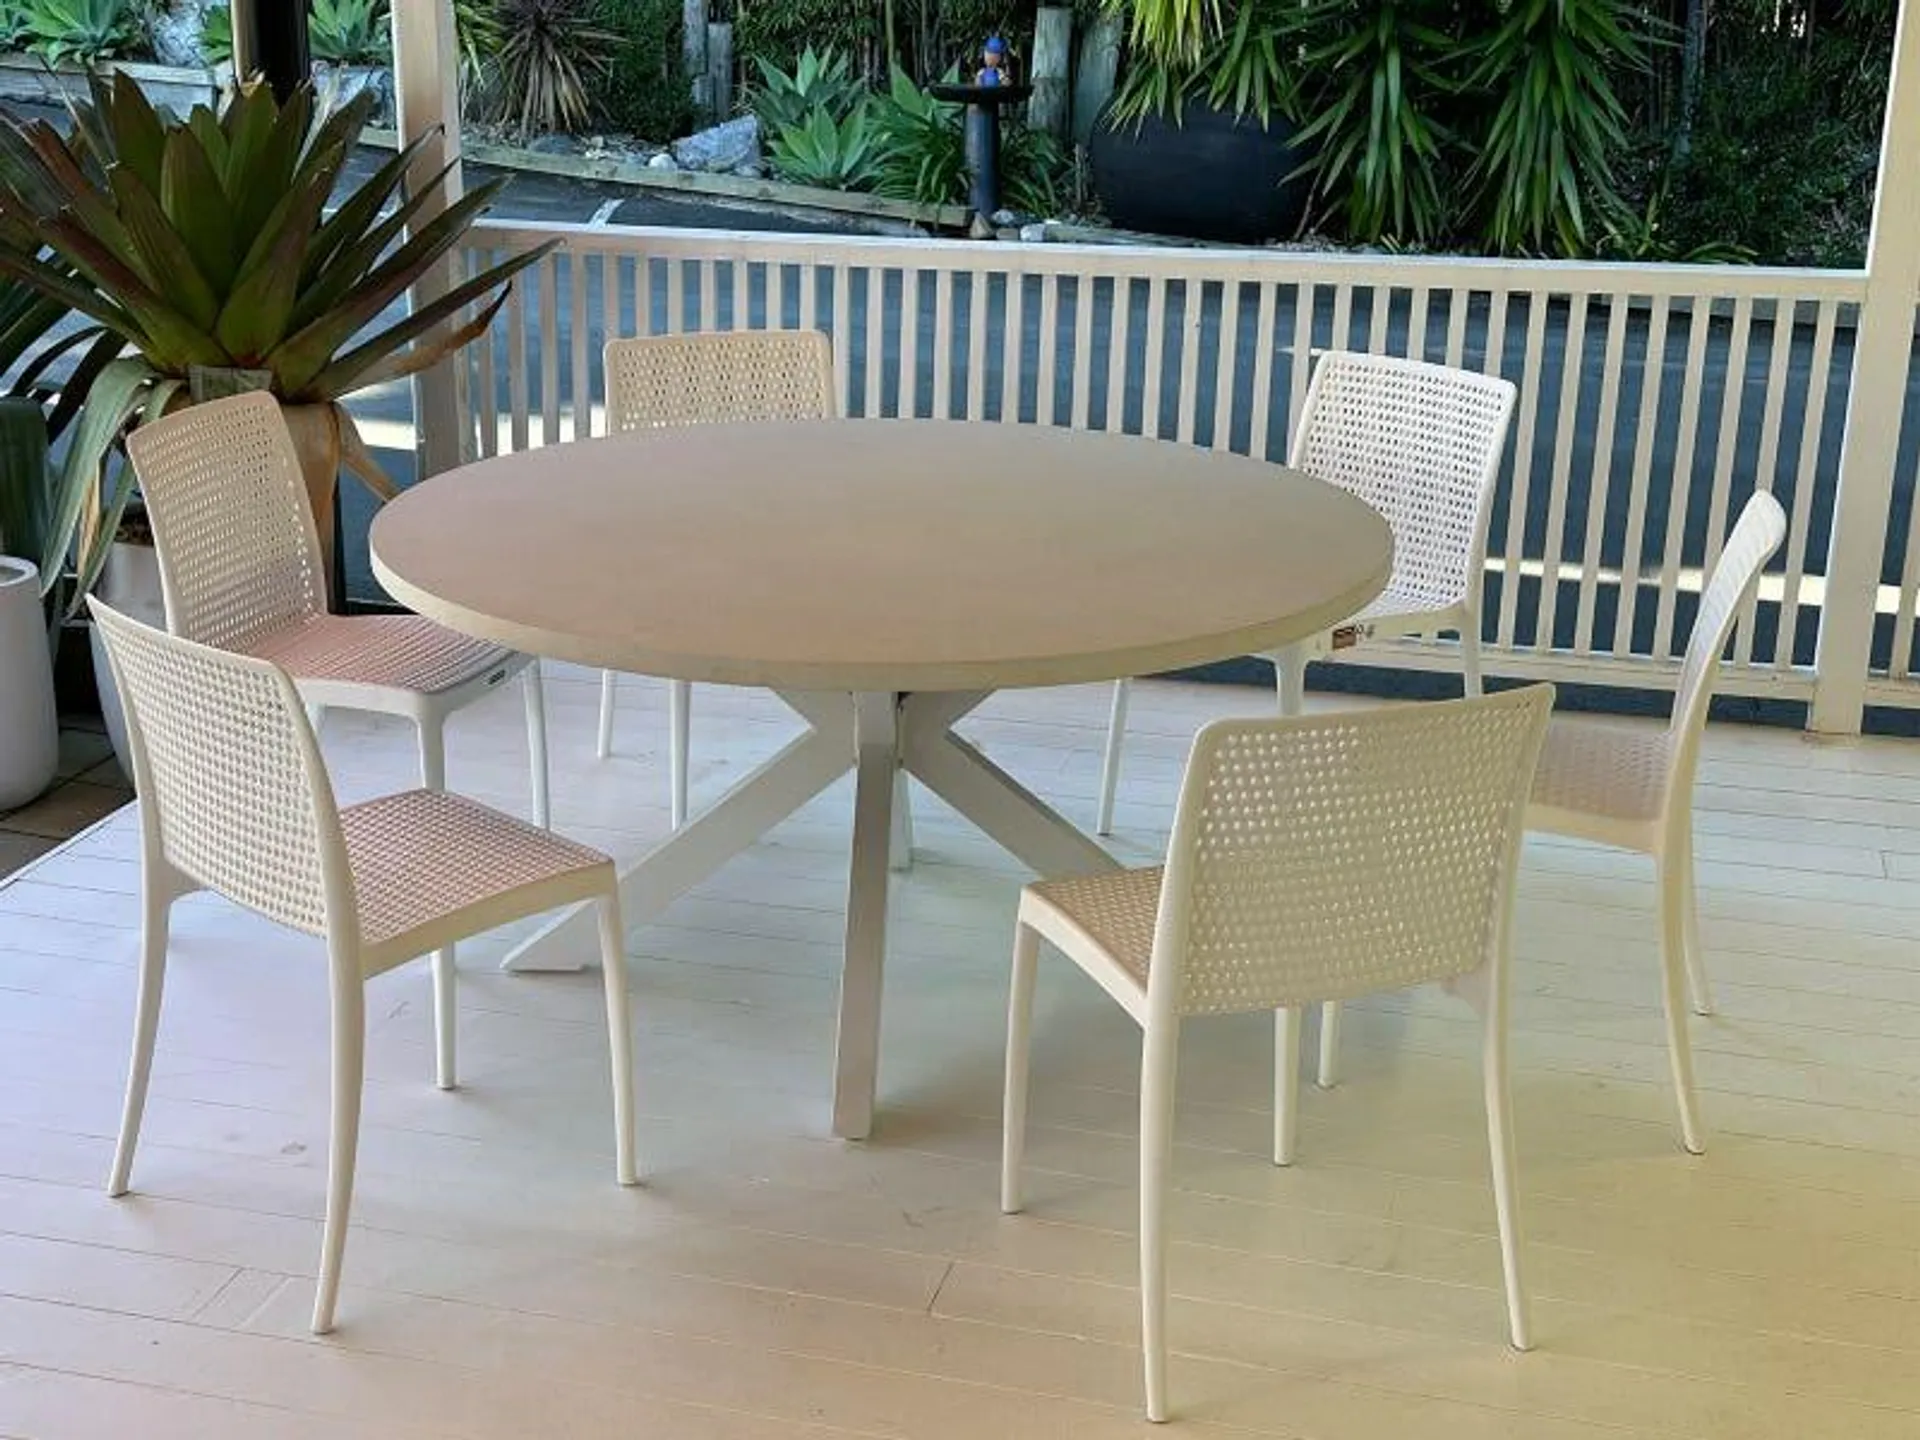 Geo Terrazzo Table with Isabelle Chairs 7pc Outdoor Dining Setting